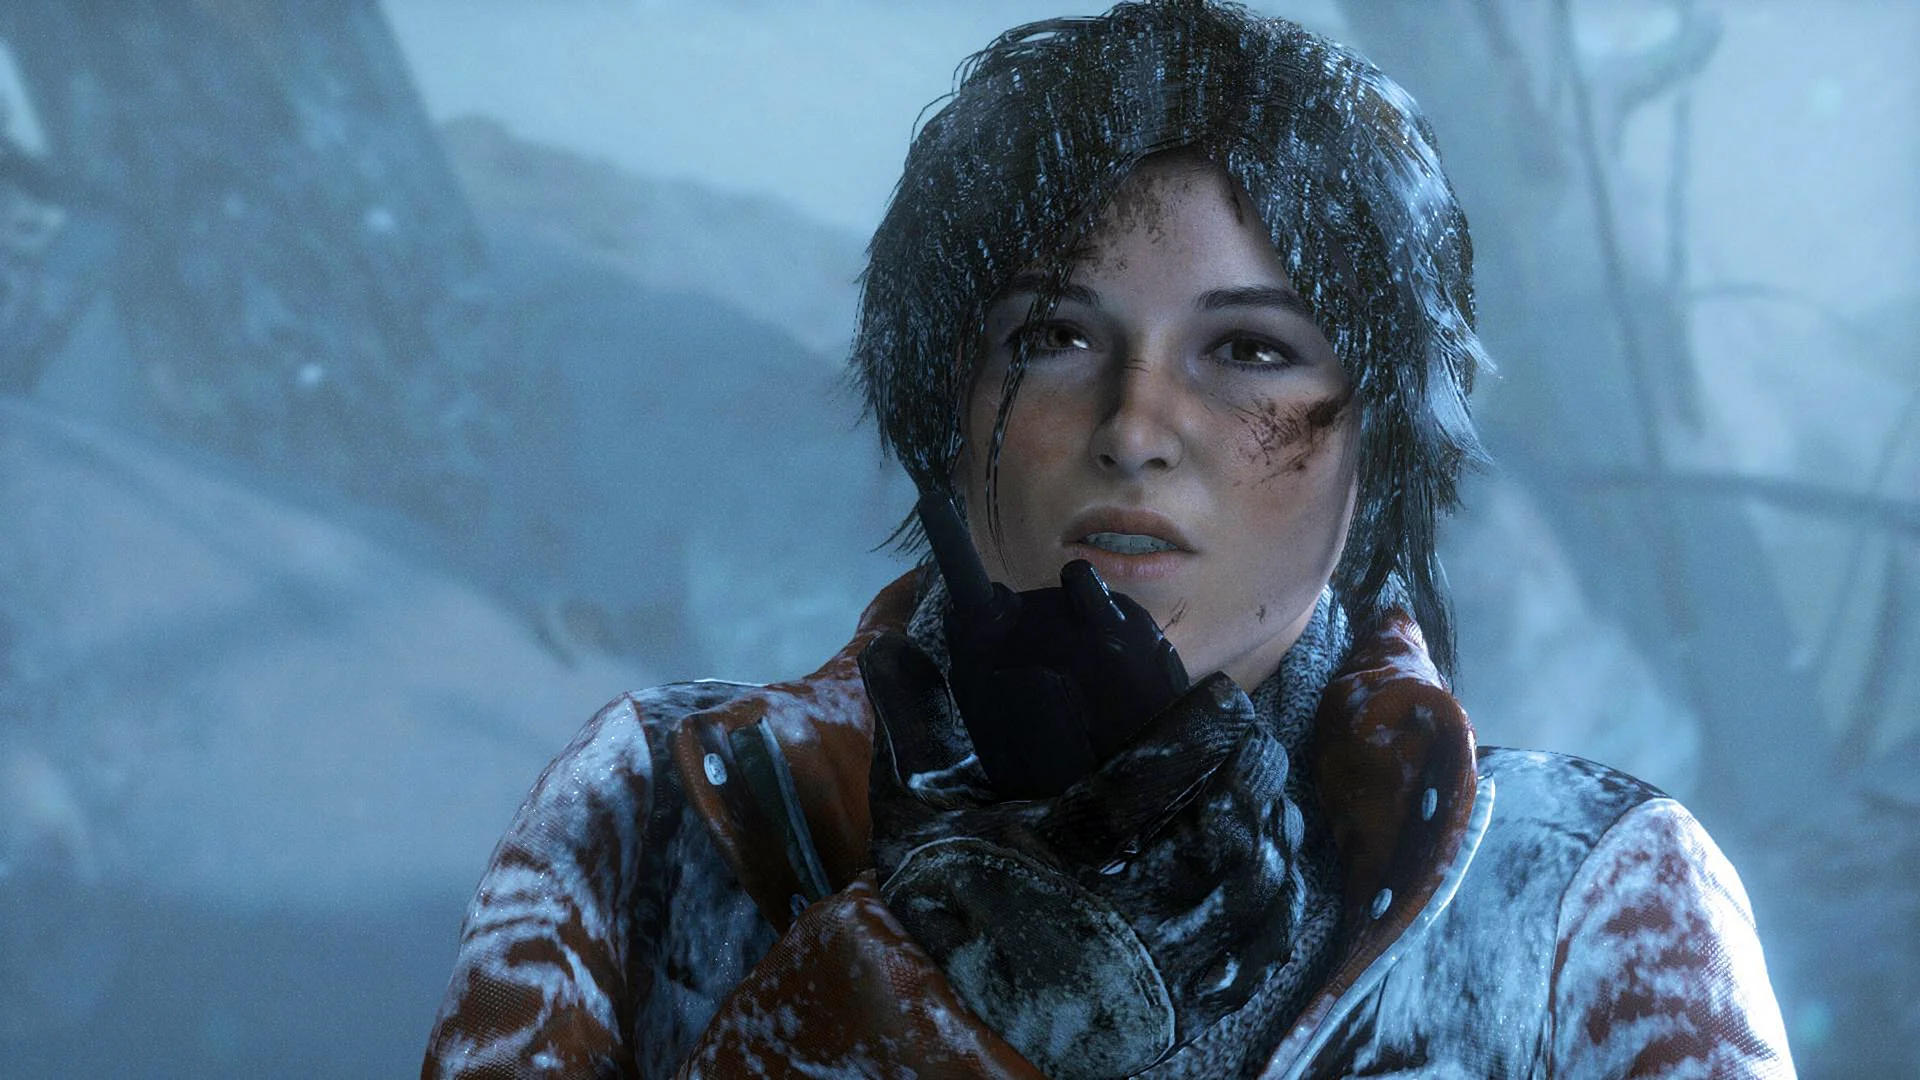 Rise Of The Tomb Raider Wallpaper